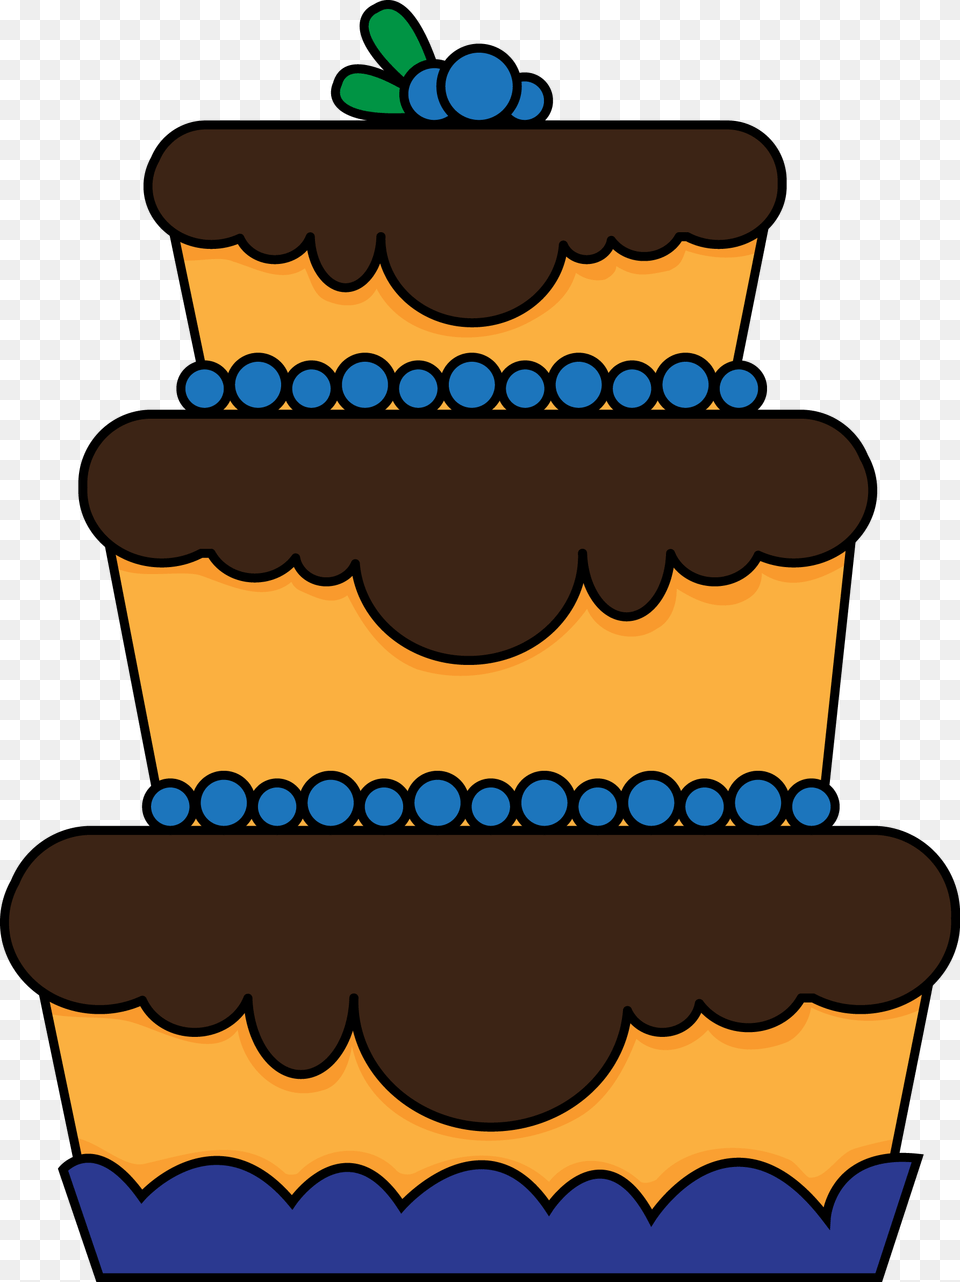 Cake Color Candy And Other Sweets, Dessert, Food, Dynamite, Weapon Free Png